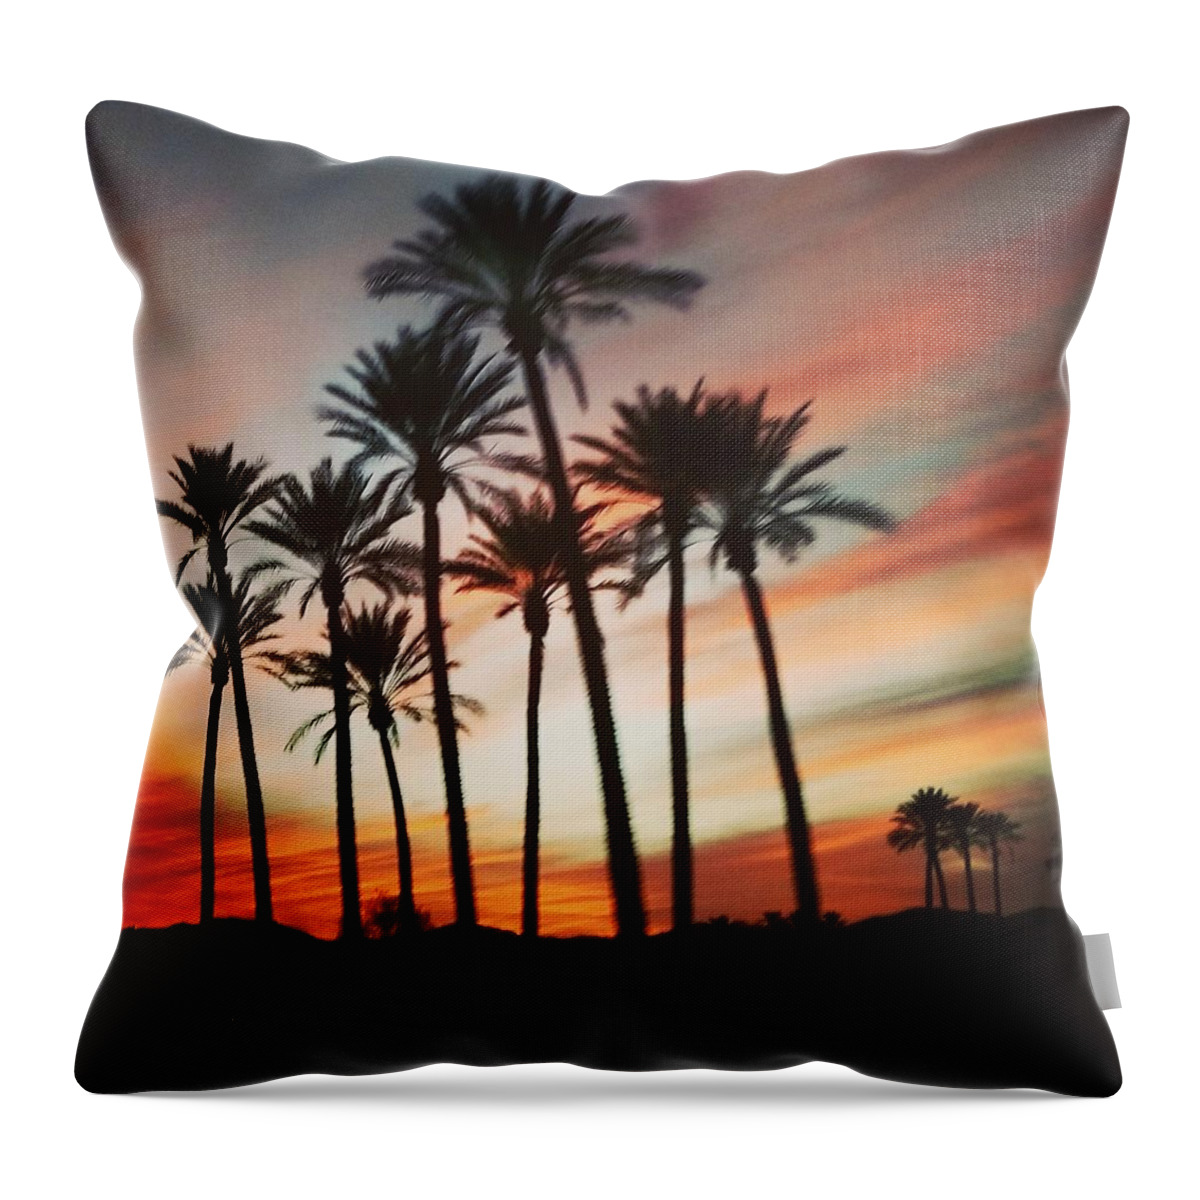 Palm Trees Throw Pillow featuring the photograph Desert Palms Sunset by Vic Ritchey